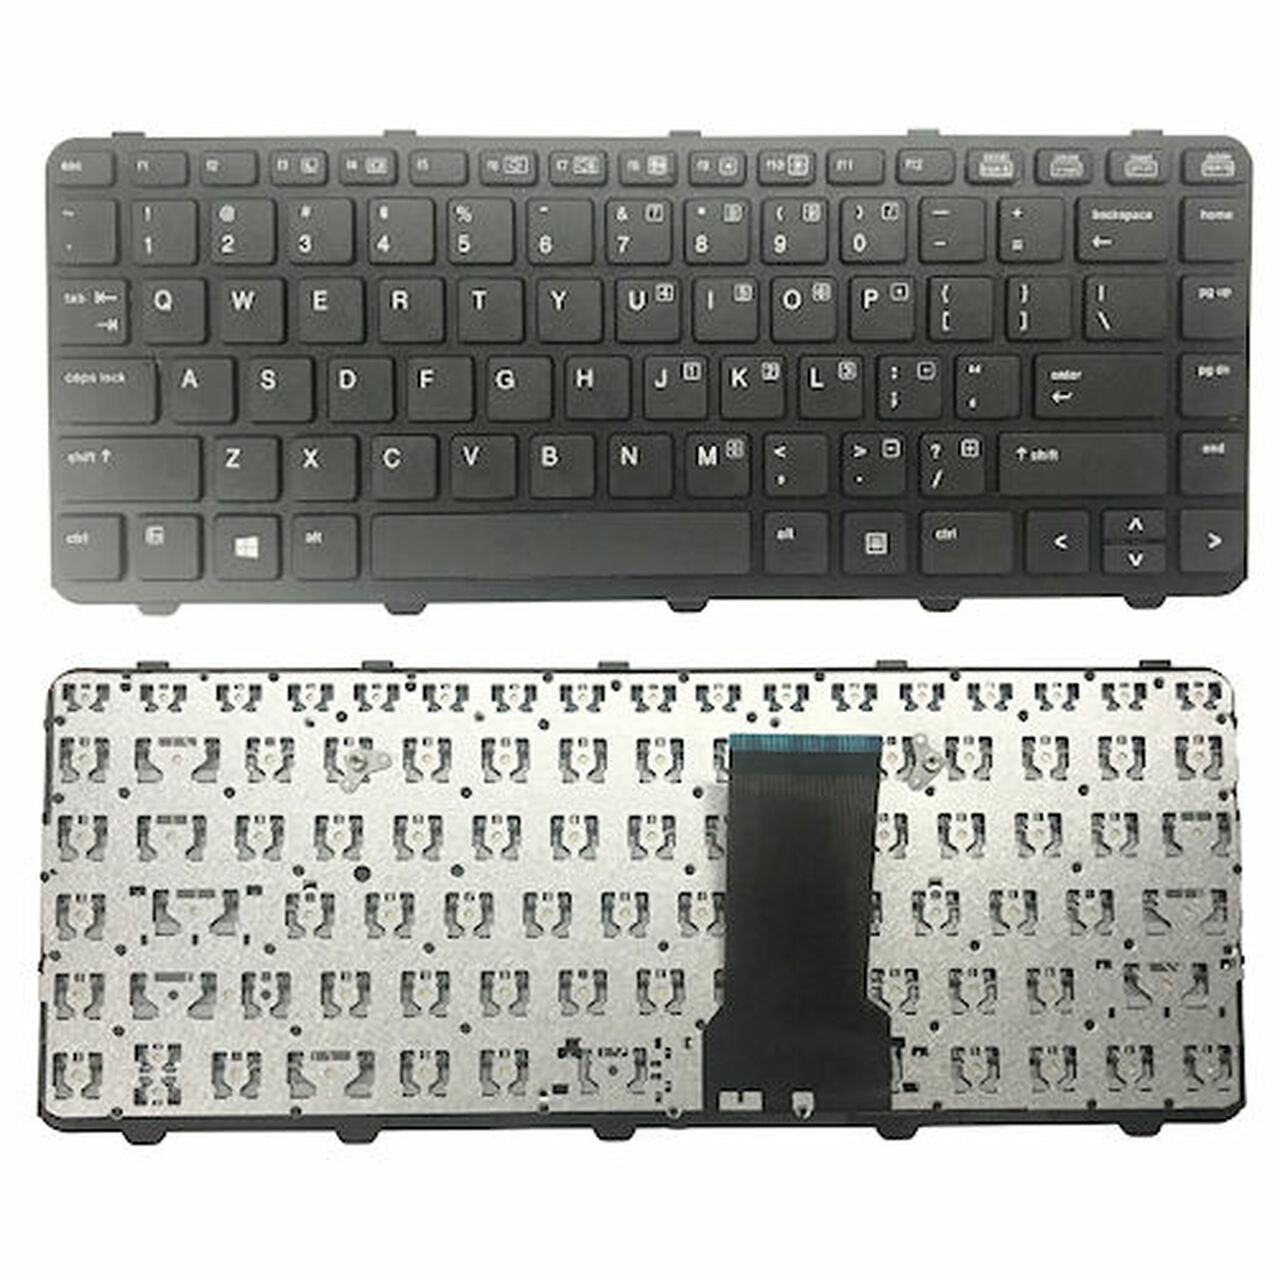 HP 430G1 KEYBOARD TP-CAN/ENG